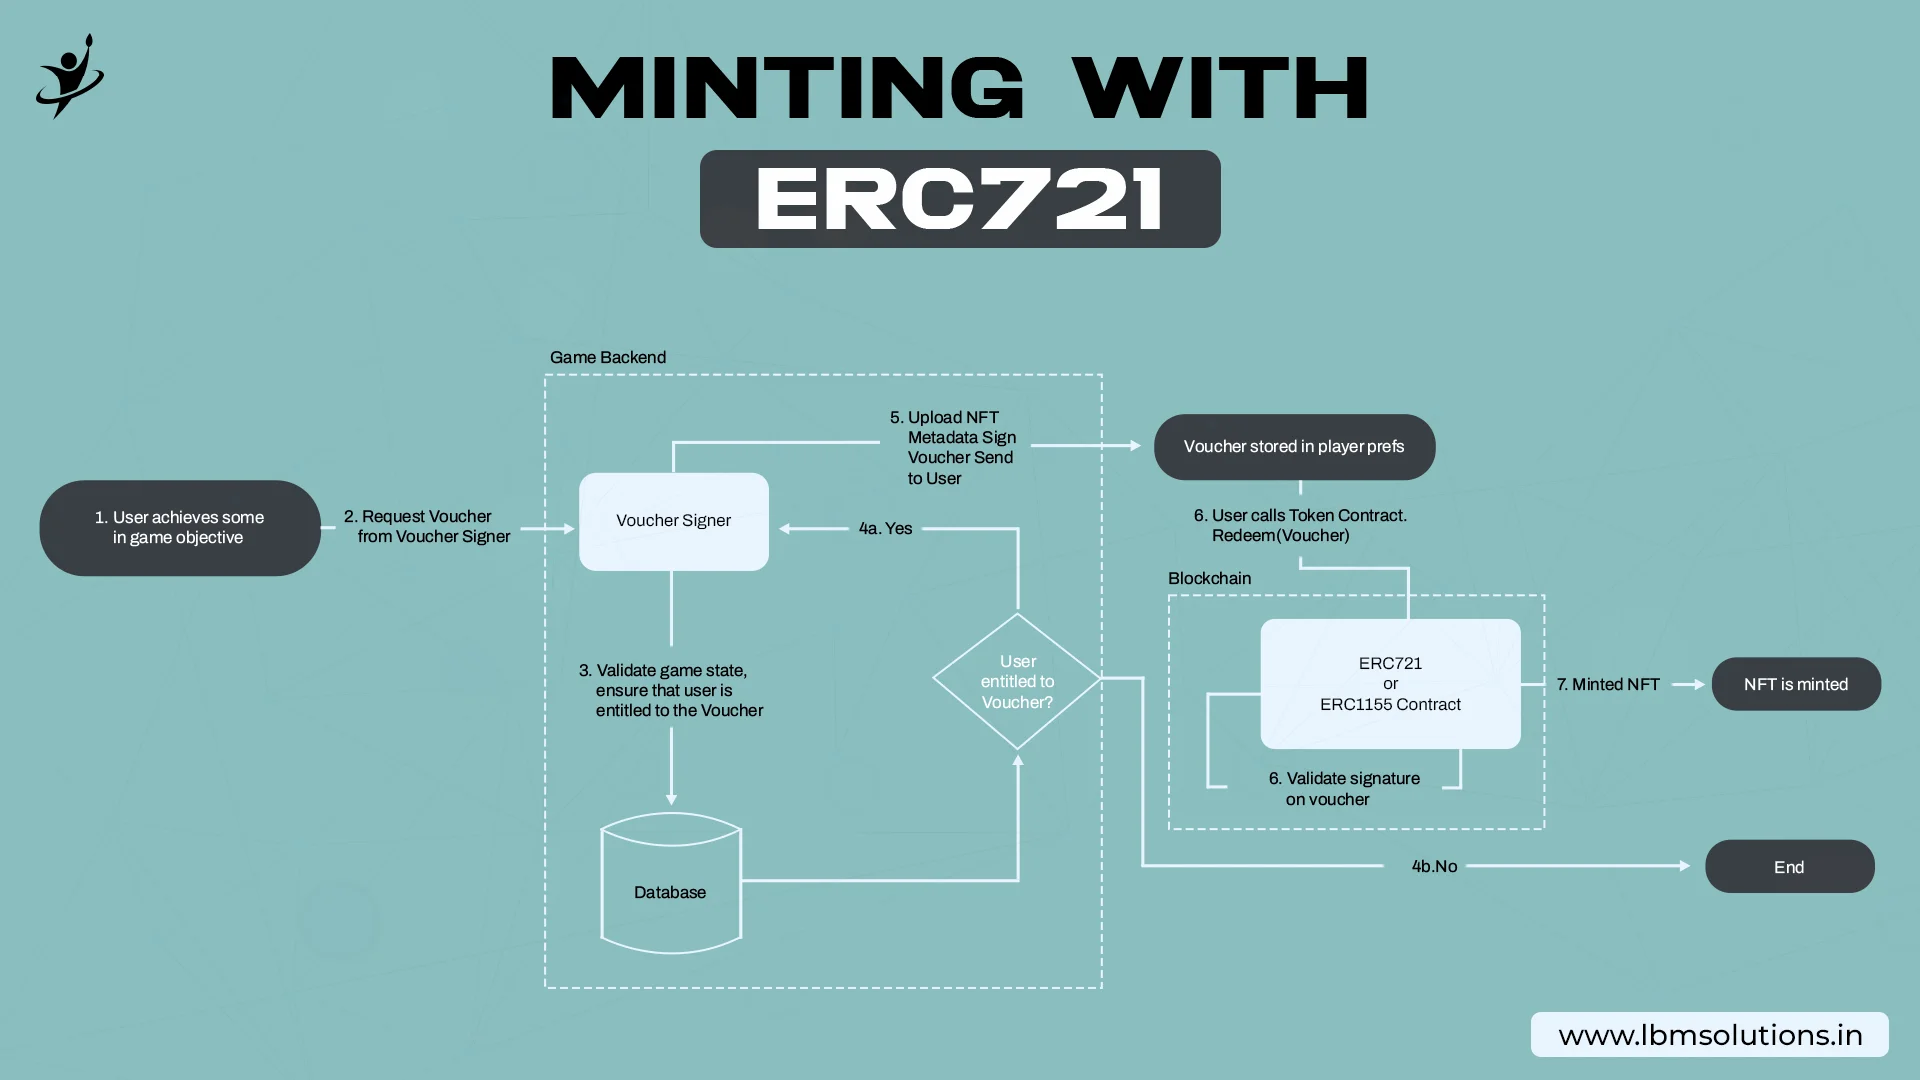 Minting with ERC721